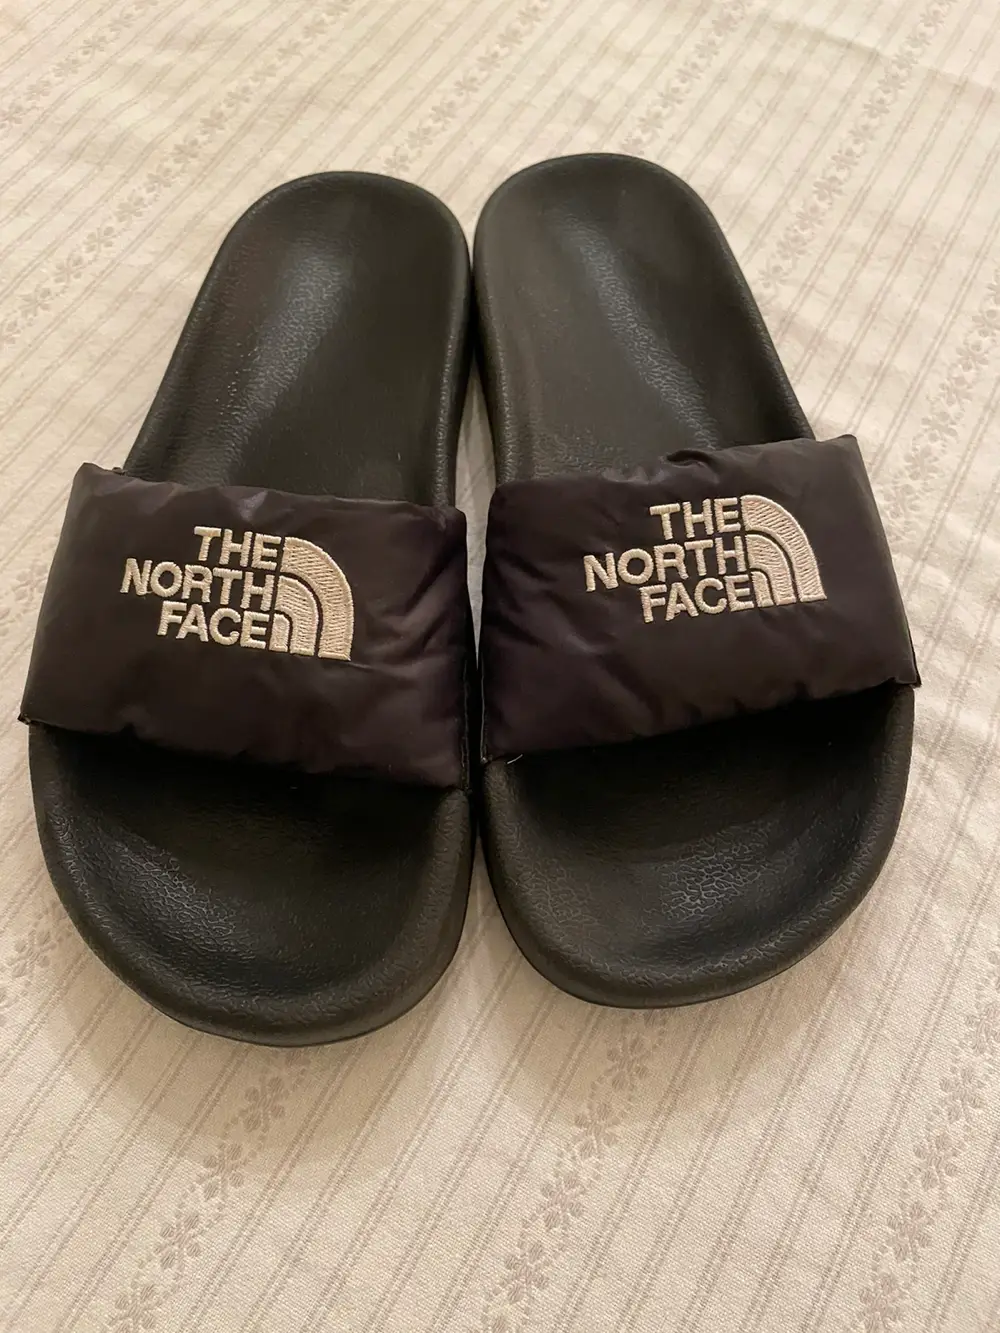 The North Face North Face